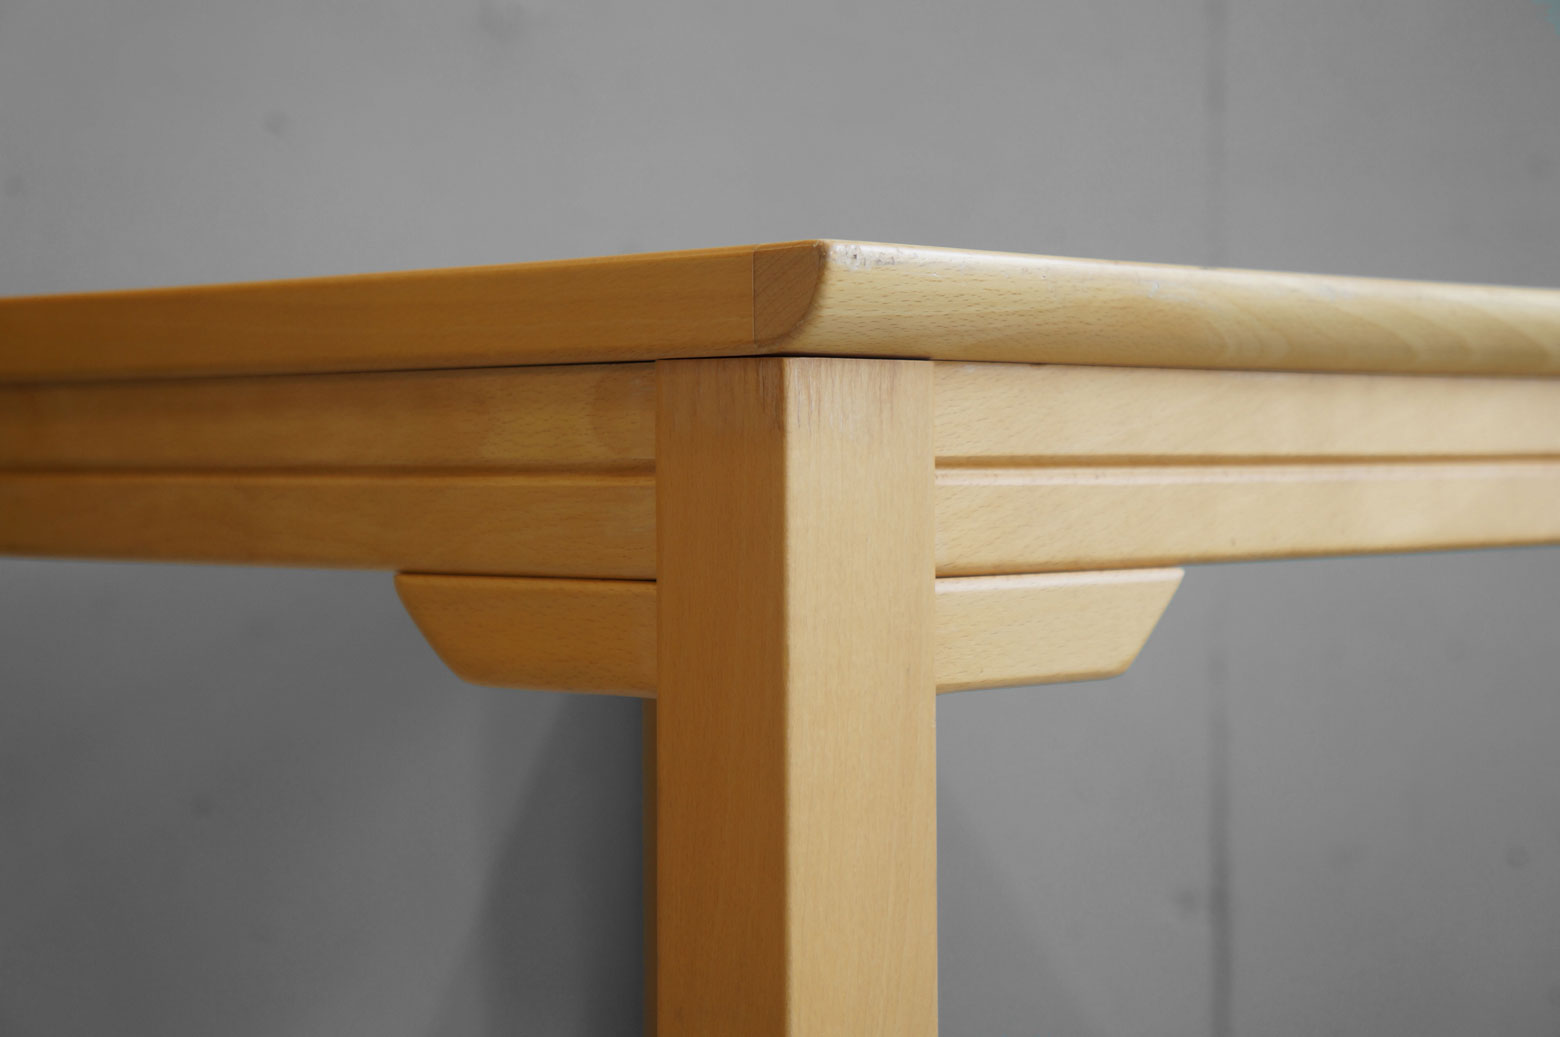 Albin i Hyssna ab Sofa Table made in Sweden/Albin i Hyssna ab ソファテーブル スウェーデン